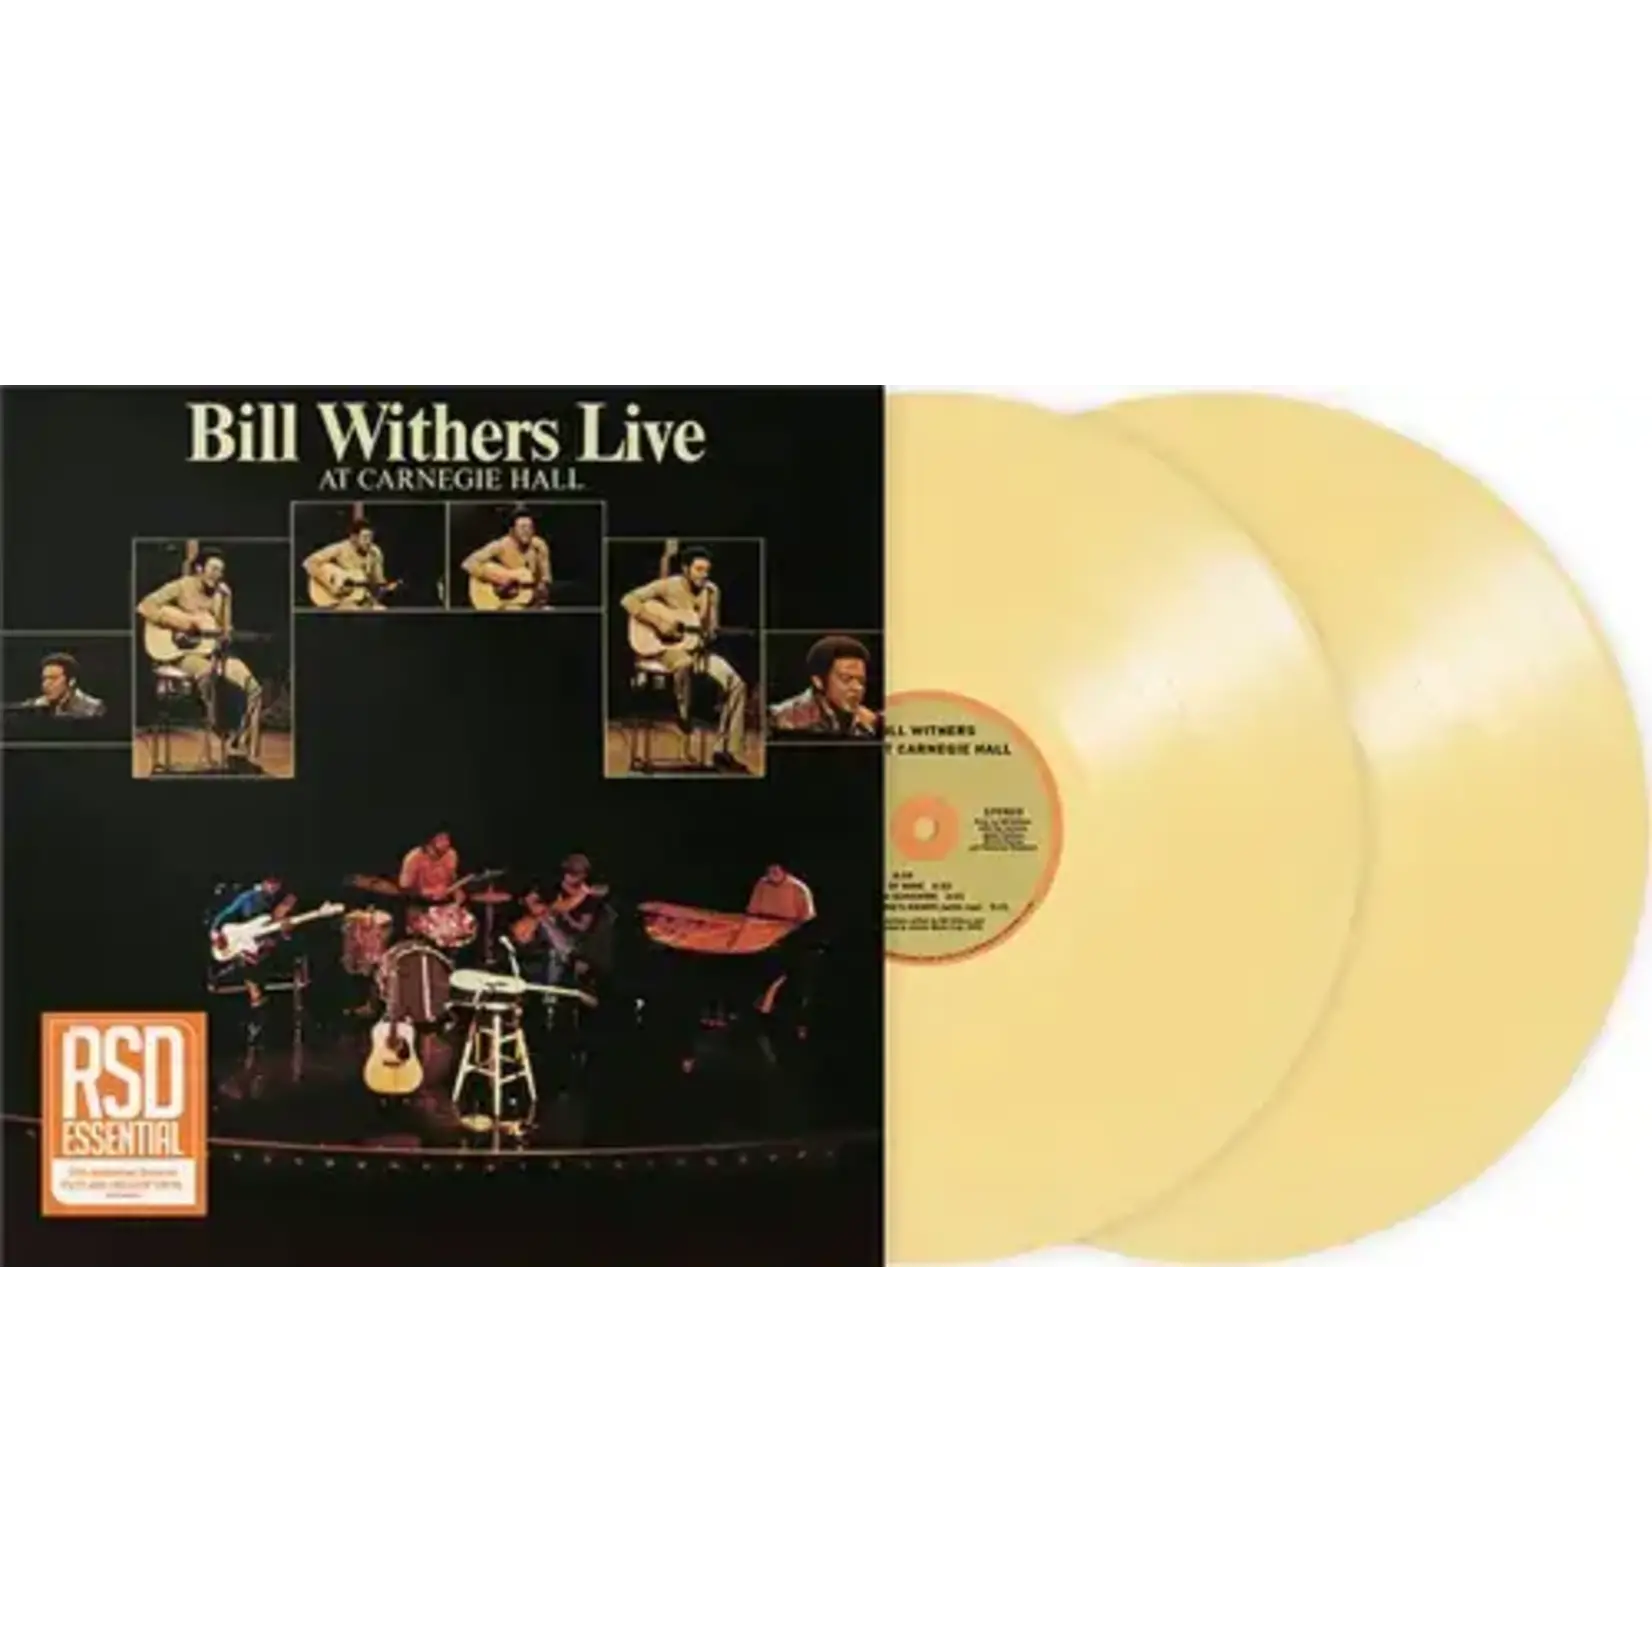 [New] Bill Withers - Live At Carnegie Hall (2LP, custard yellow vinyl, indie exclusive)